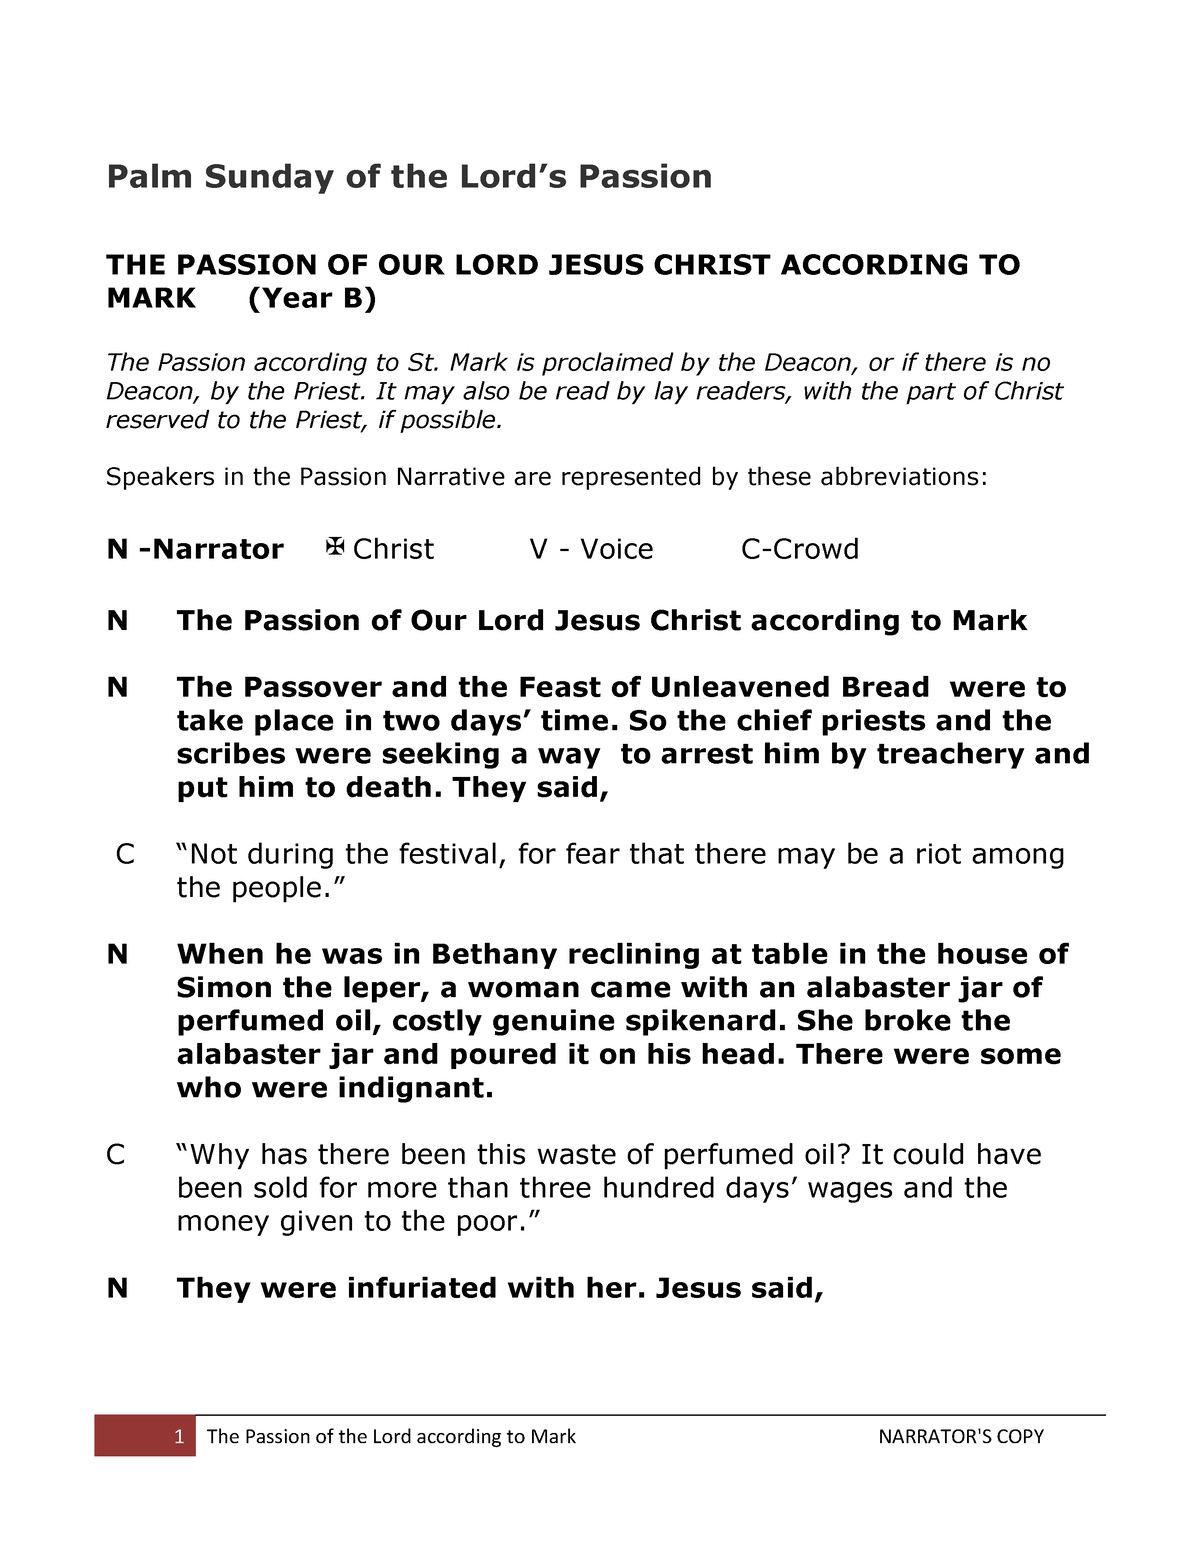 The passion of the Lord according to Mark narrator 2 - Palm Sunday of ...